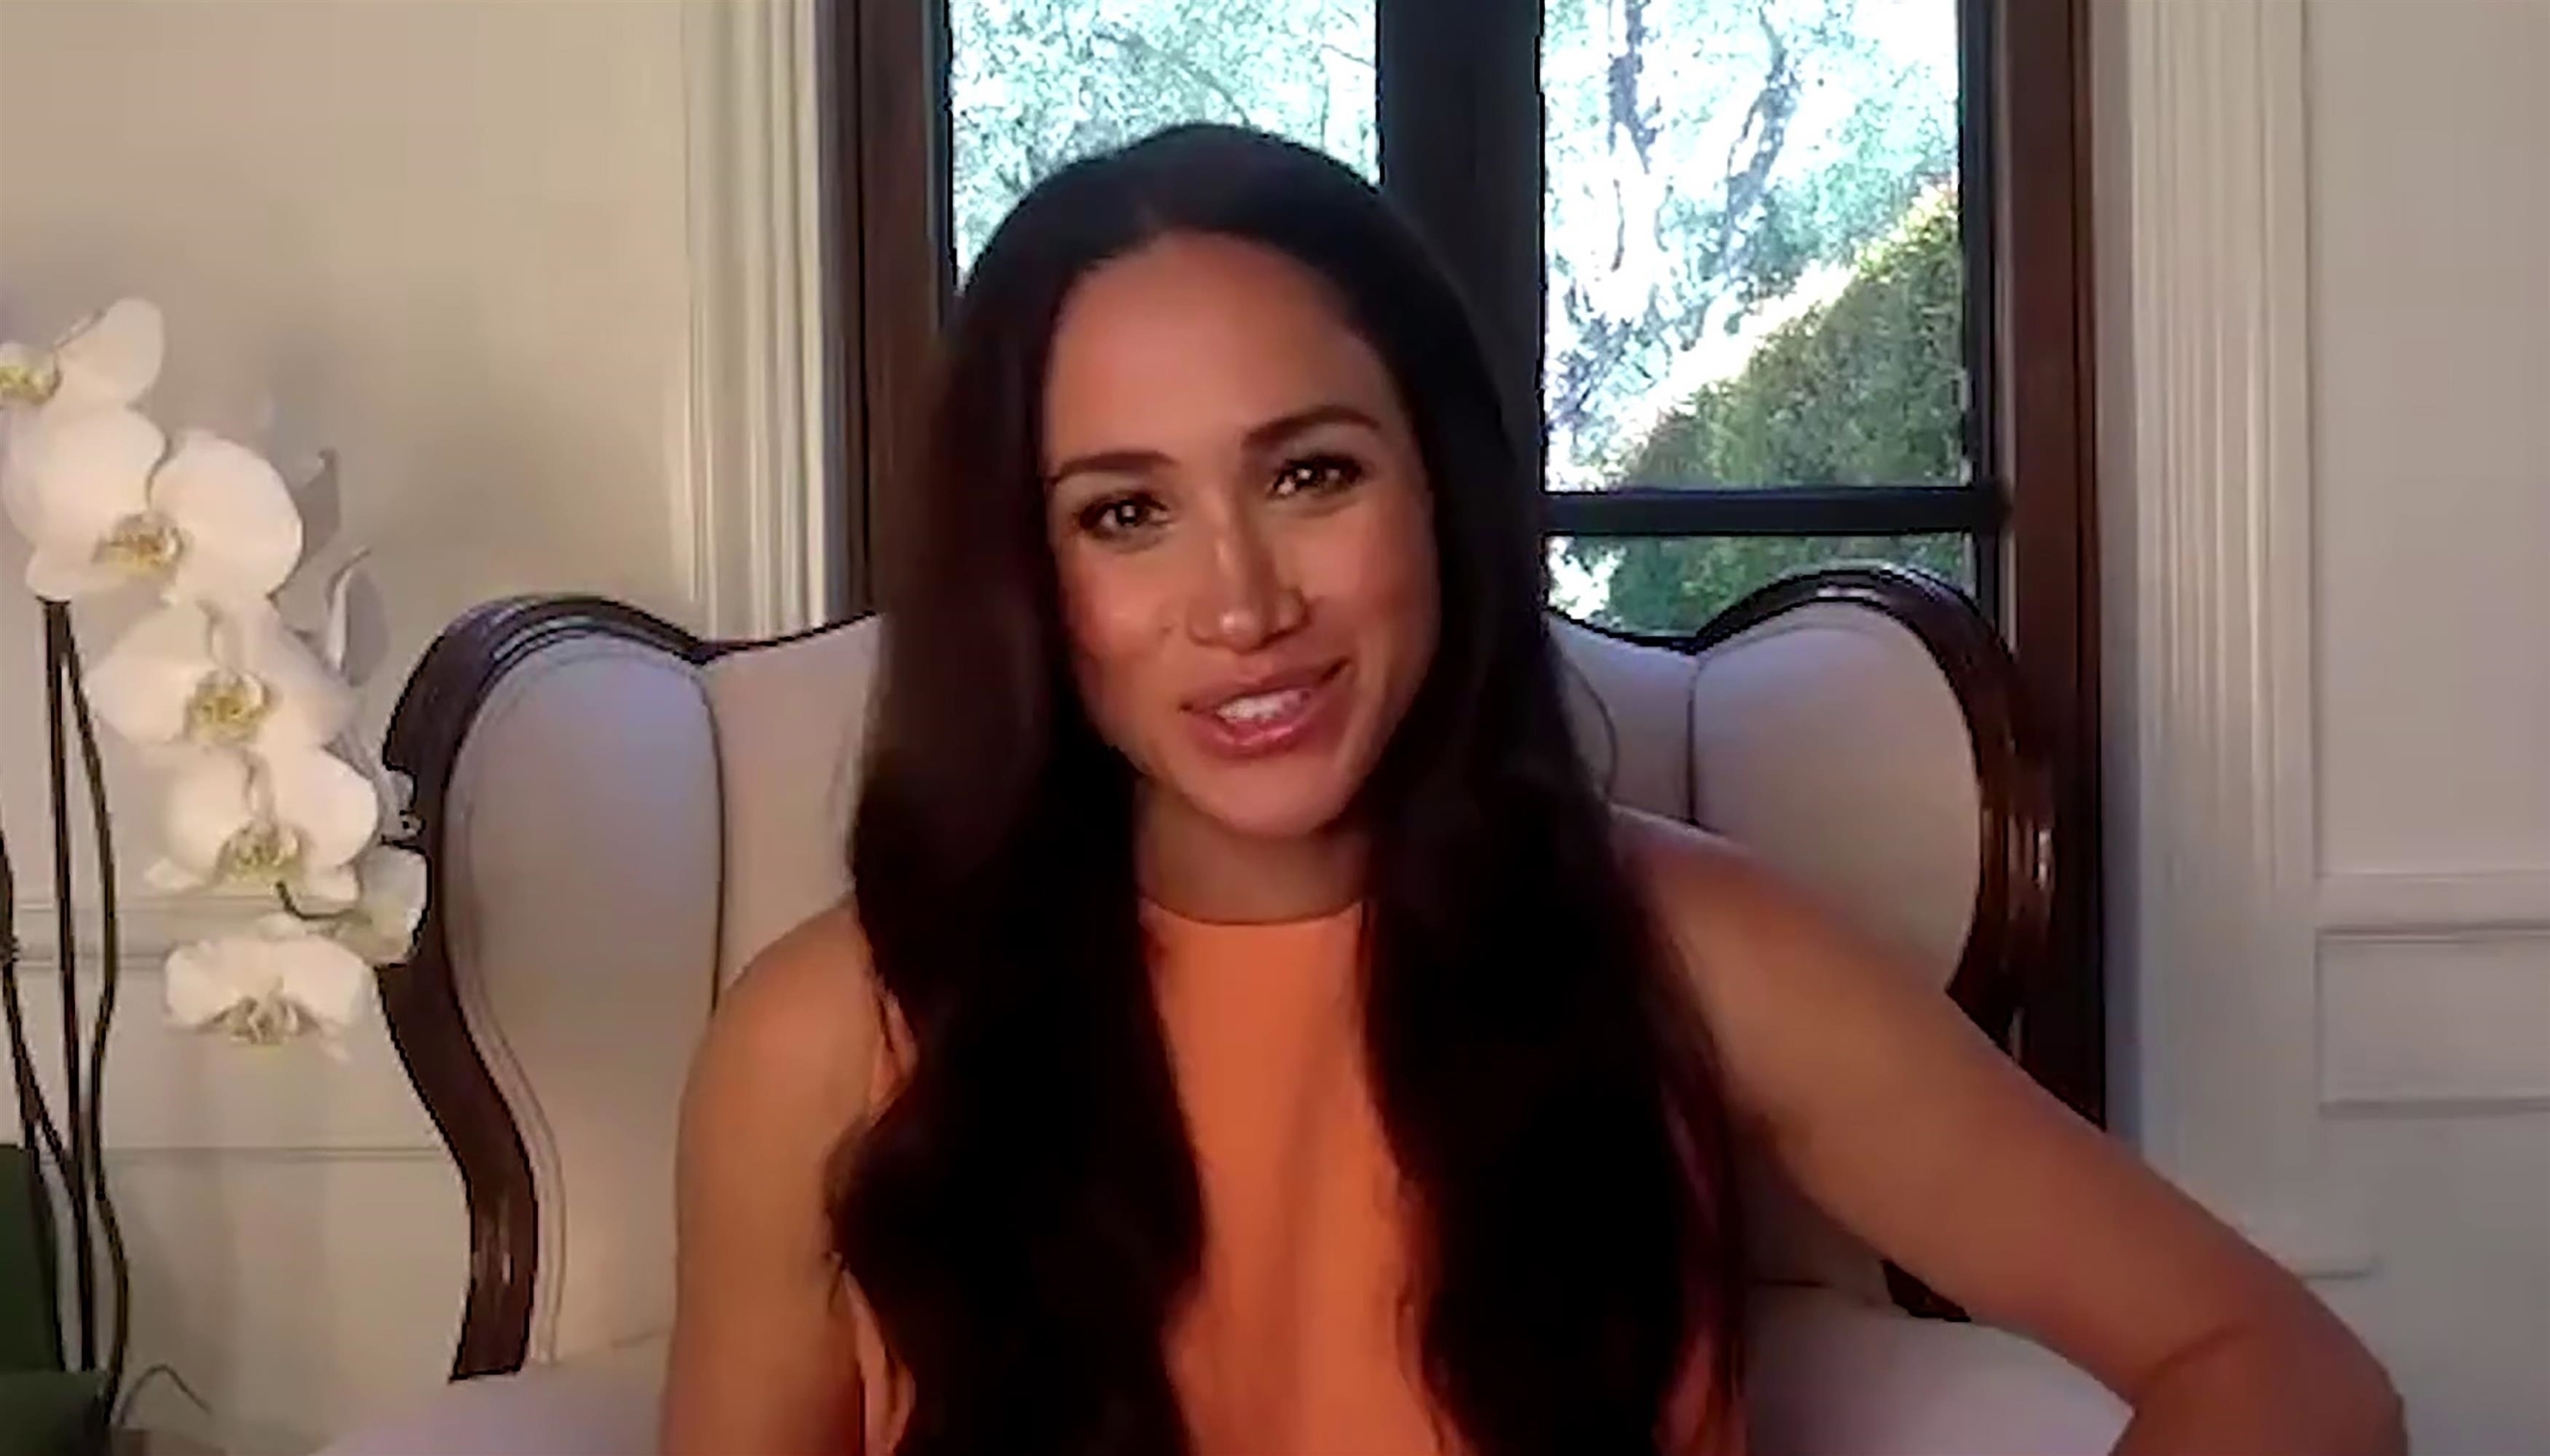 Los Angeles,   - Meghan, The Duchess of Sussex, on America's racial reckoning.   Meghan, The Duchess of Sussex, asks Emily Ramshaw, The 19thâ€™s Co-Founder and CEO, about creating a transformative newsroom centered on gender equity in the final conversation of The 19th Represents, the inaugural summit of The 19th.

The 19th is a new nonprofit, nonpartisan newsroom reporting on gender, politics and policy. To learn more about The 19th, visit summit.19thnews.org.    ---------         

*

USA: +1 310 798 9111 / usasales@backgrid.com

*UK Clients - Pictures Containing Children
Please Pixelate Face Prior To Publication*,Image: 552683765, License: Rights-managed, Restrictions: RIGHTS: WORLDWIDE EXCEPT IN UNITED STATES, Model Release: no, Credit line: BACKGRID / Backgrid UK / Profimedia